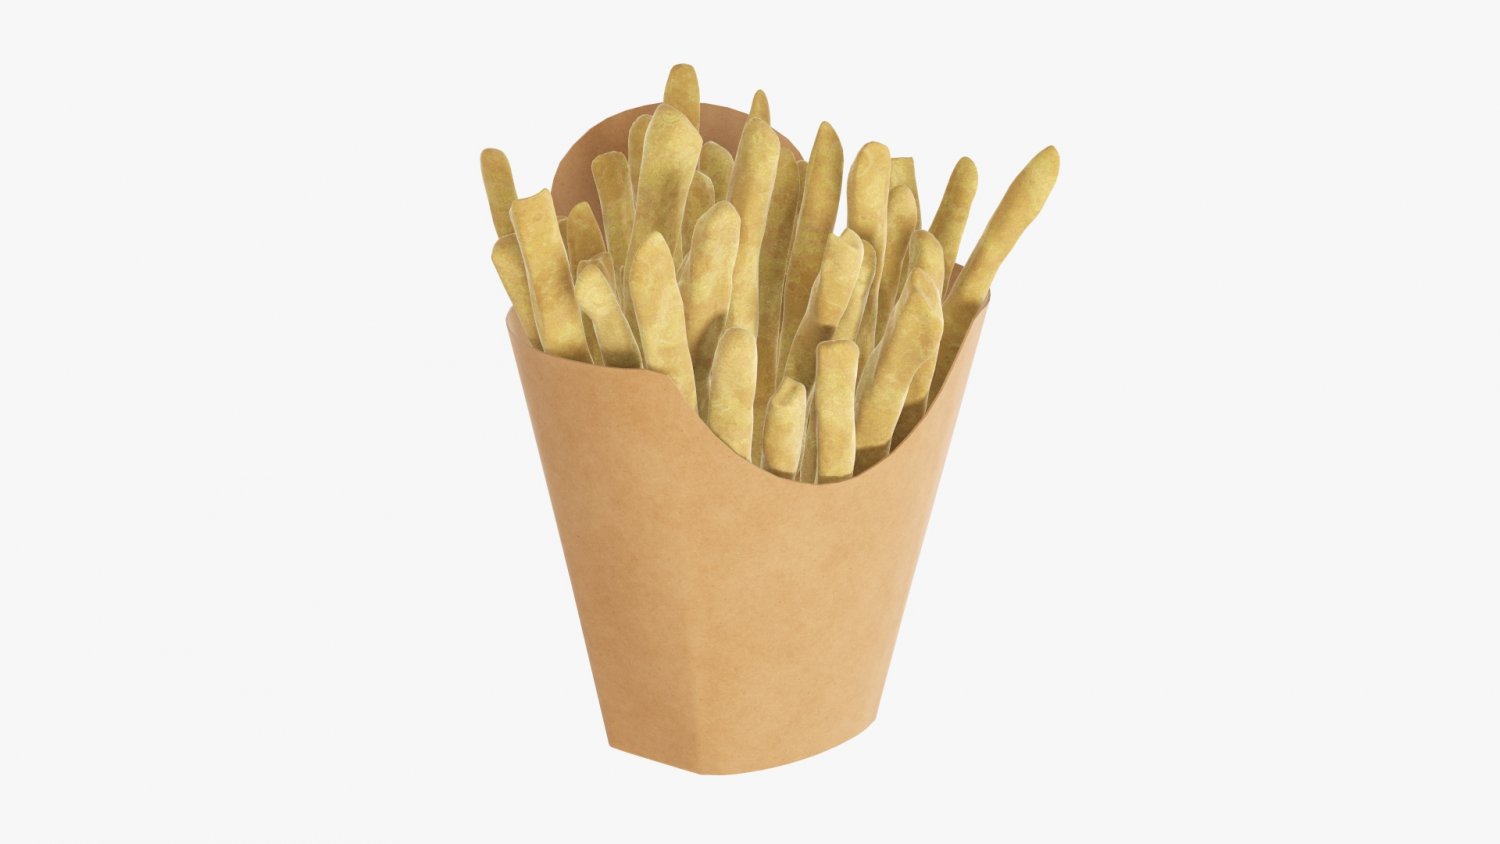 French fries potato in red paper bag. Cartoon fast food pack